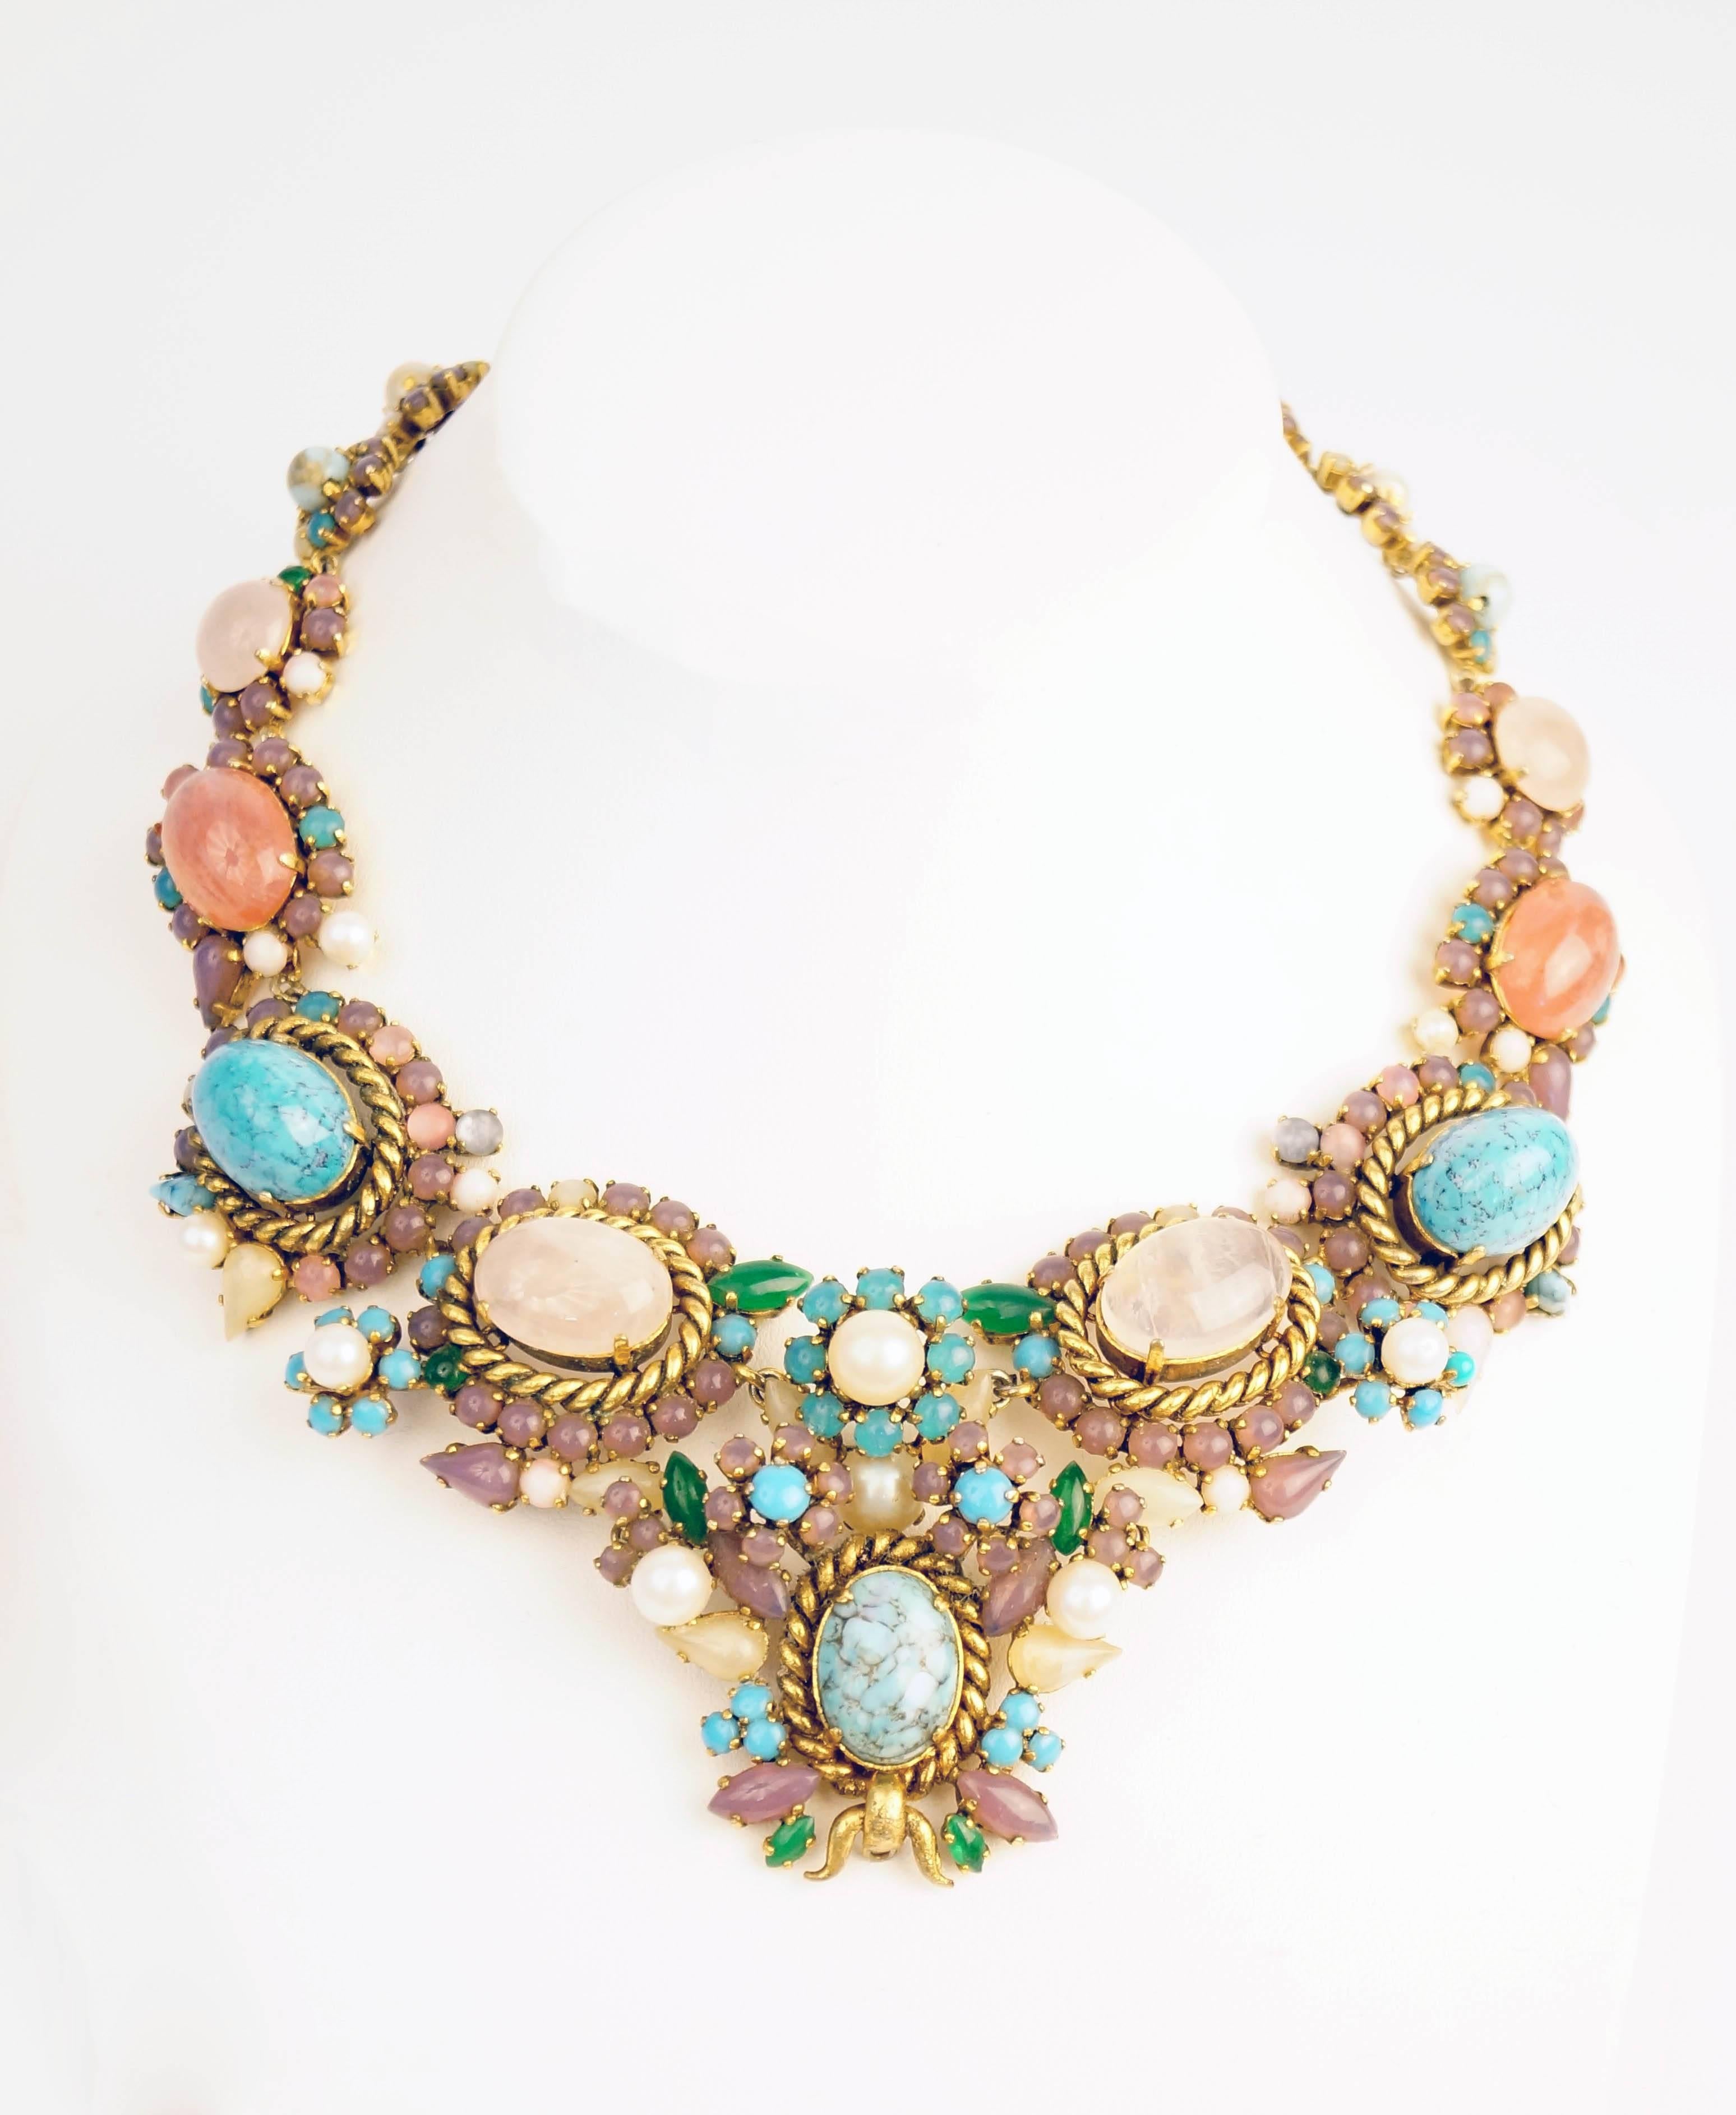 Stunning necklace by Christian Dior, showcasing faux turquoise and rose quartz cabochons surrounded by an elegant and playful assemblage of round and marquise-cut cabochons in purple, pink, green, and pearly white. This necklace of substantial